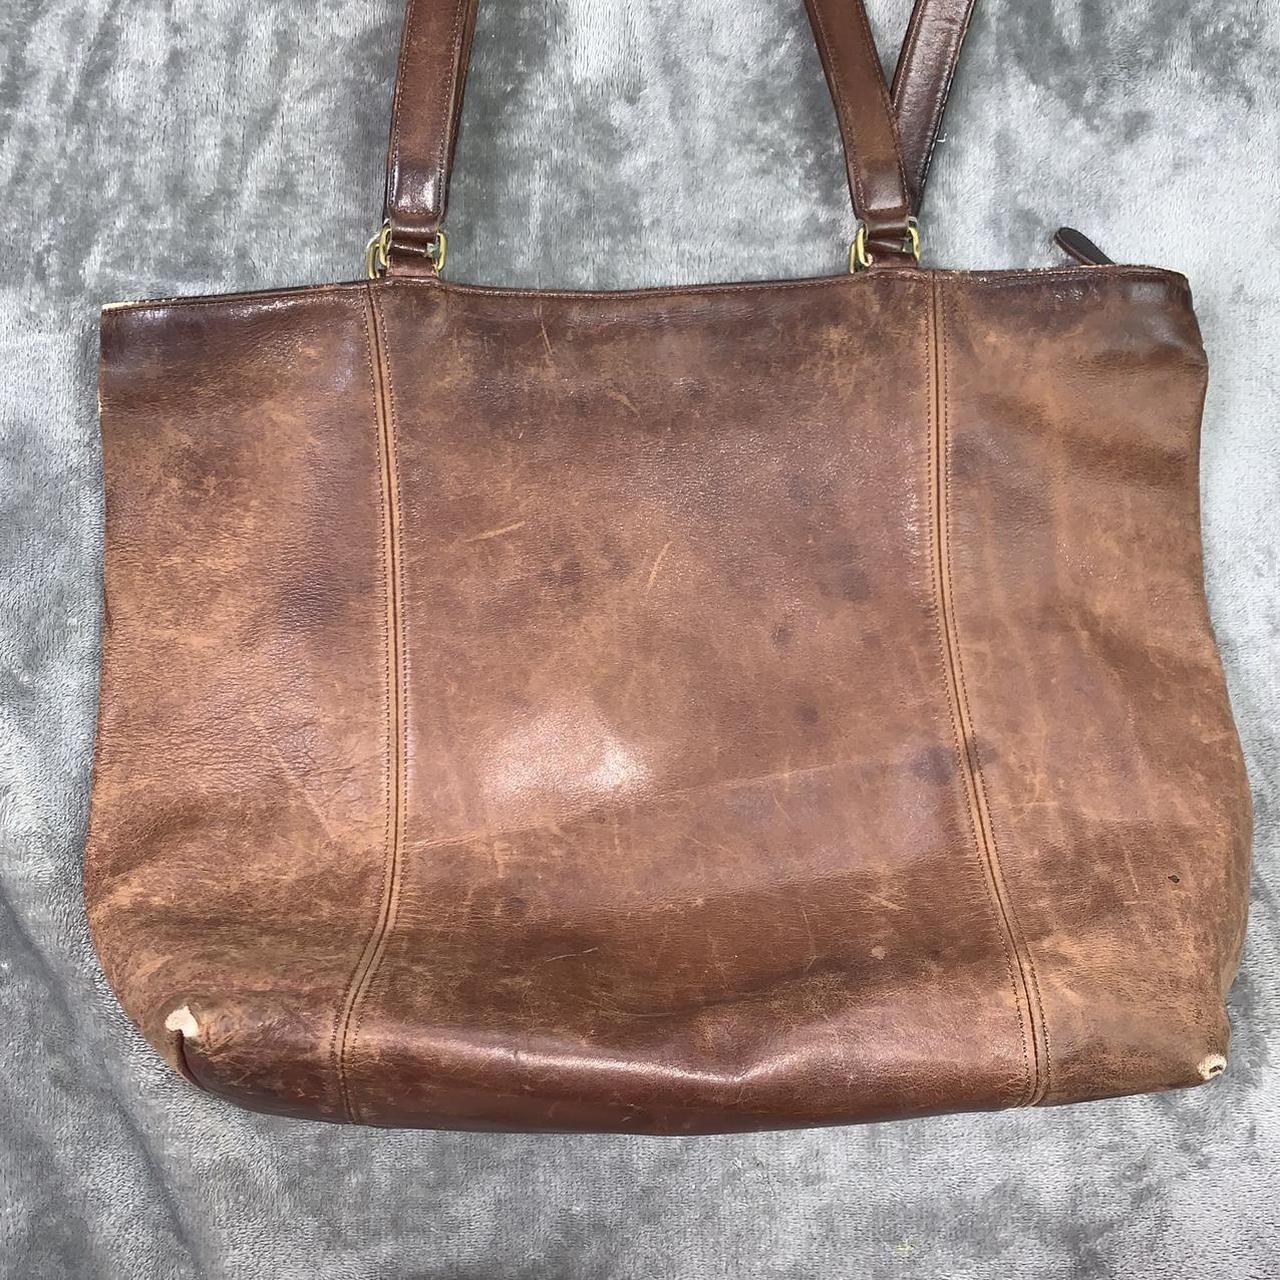 COACH Pewter Madison Mia Soft LEATHER purse TOTE - Depop